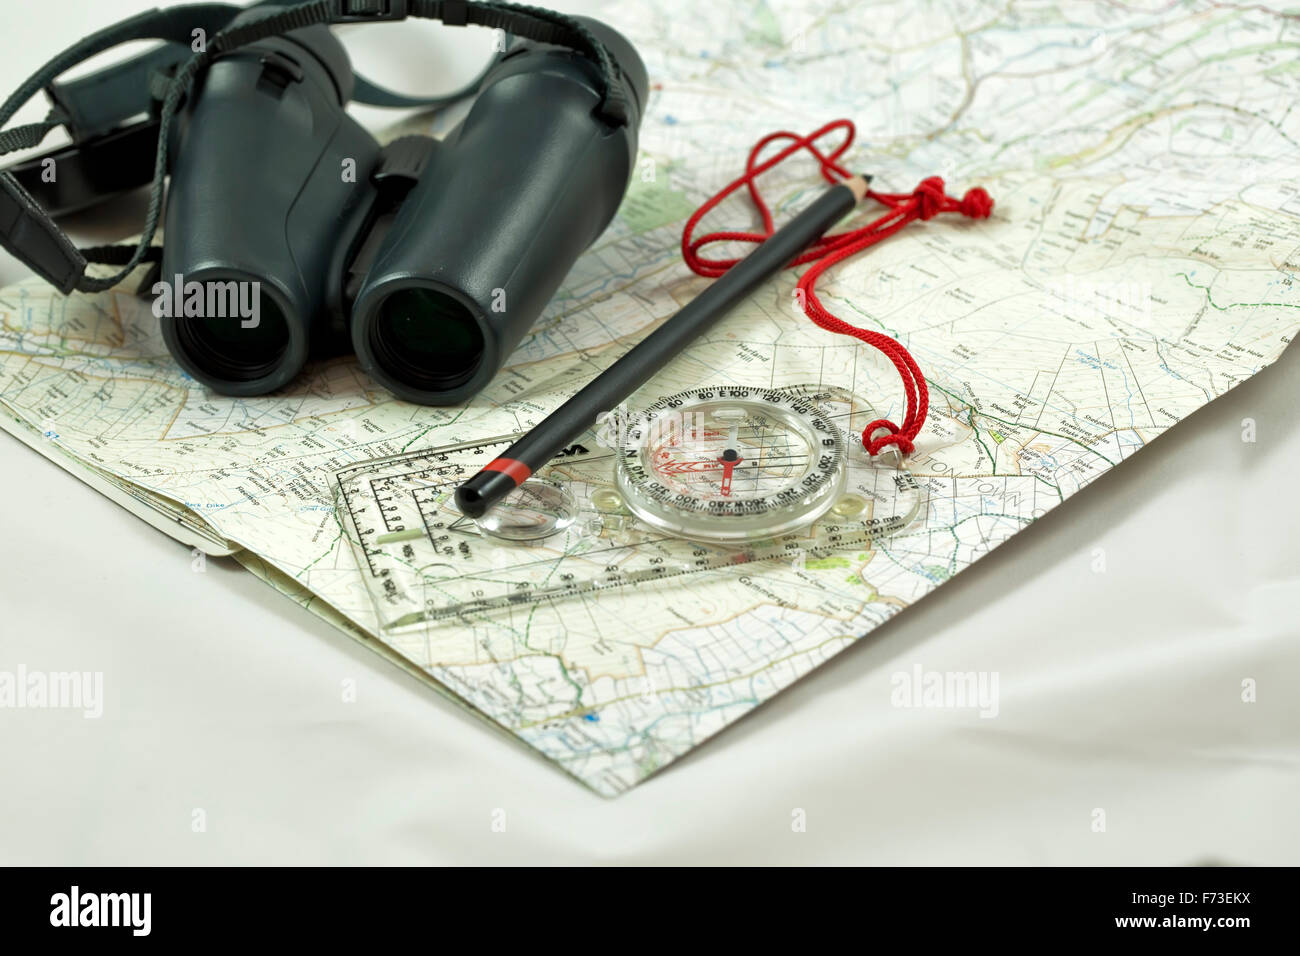 Image of a pair of binoculars sitting on a ordnance survey map with a compass and a pencil Stock Photo